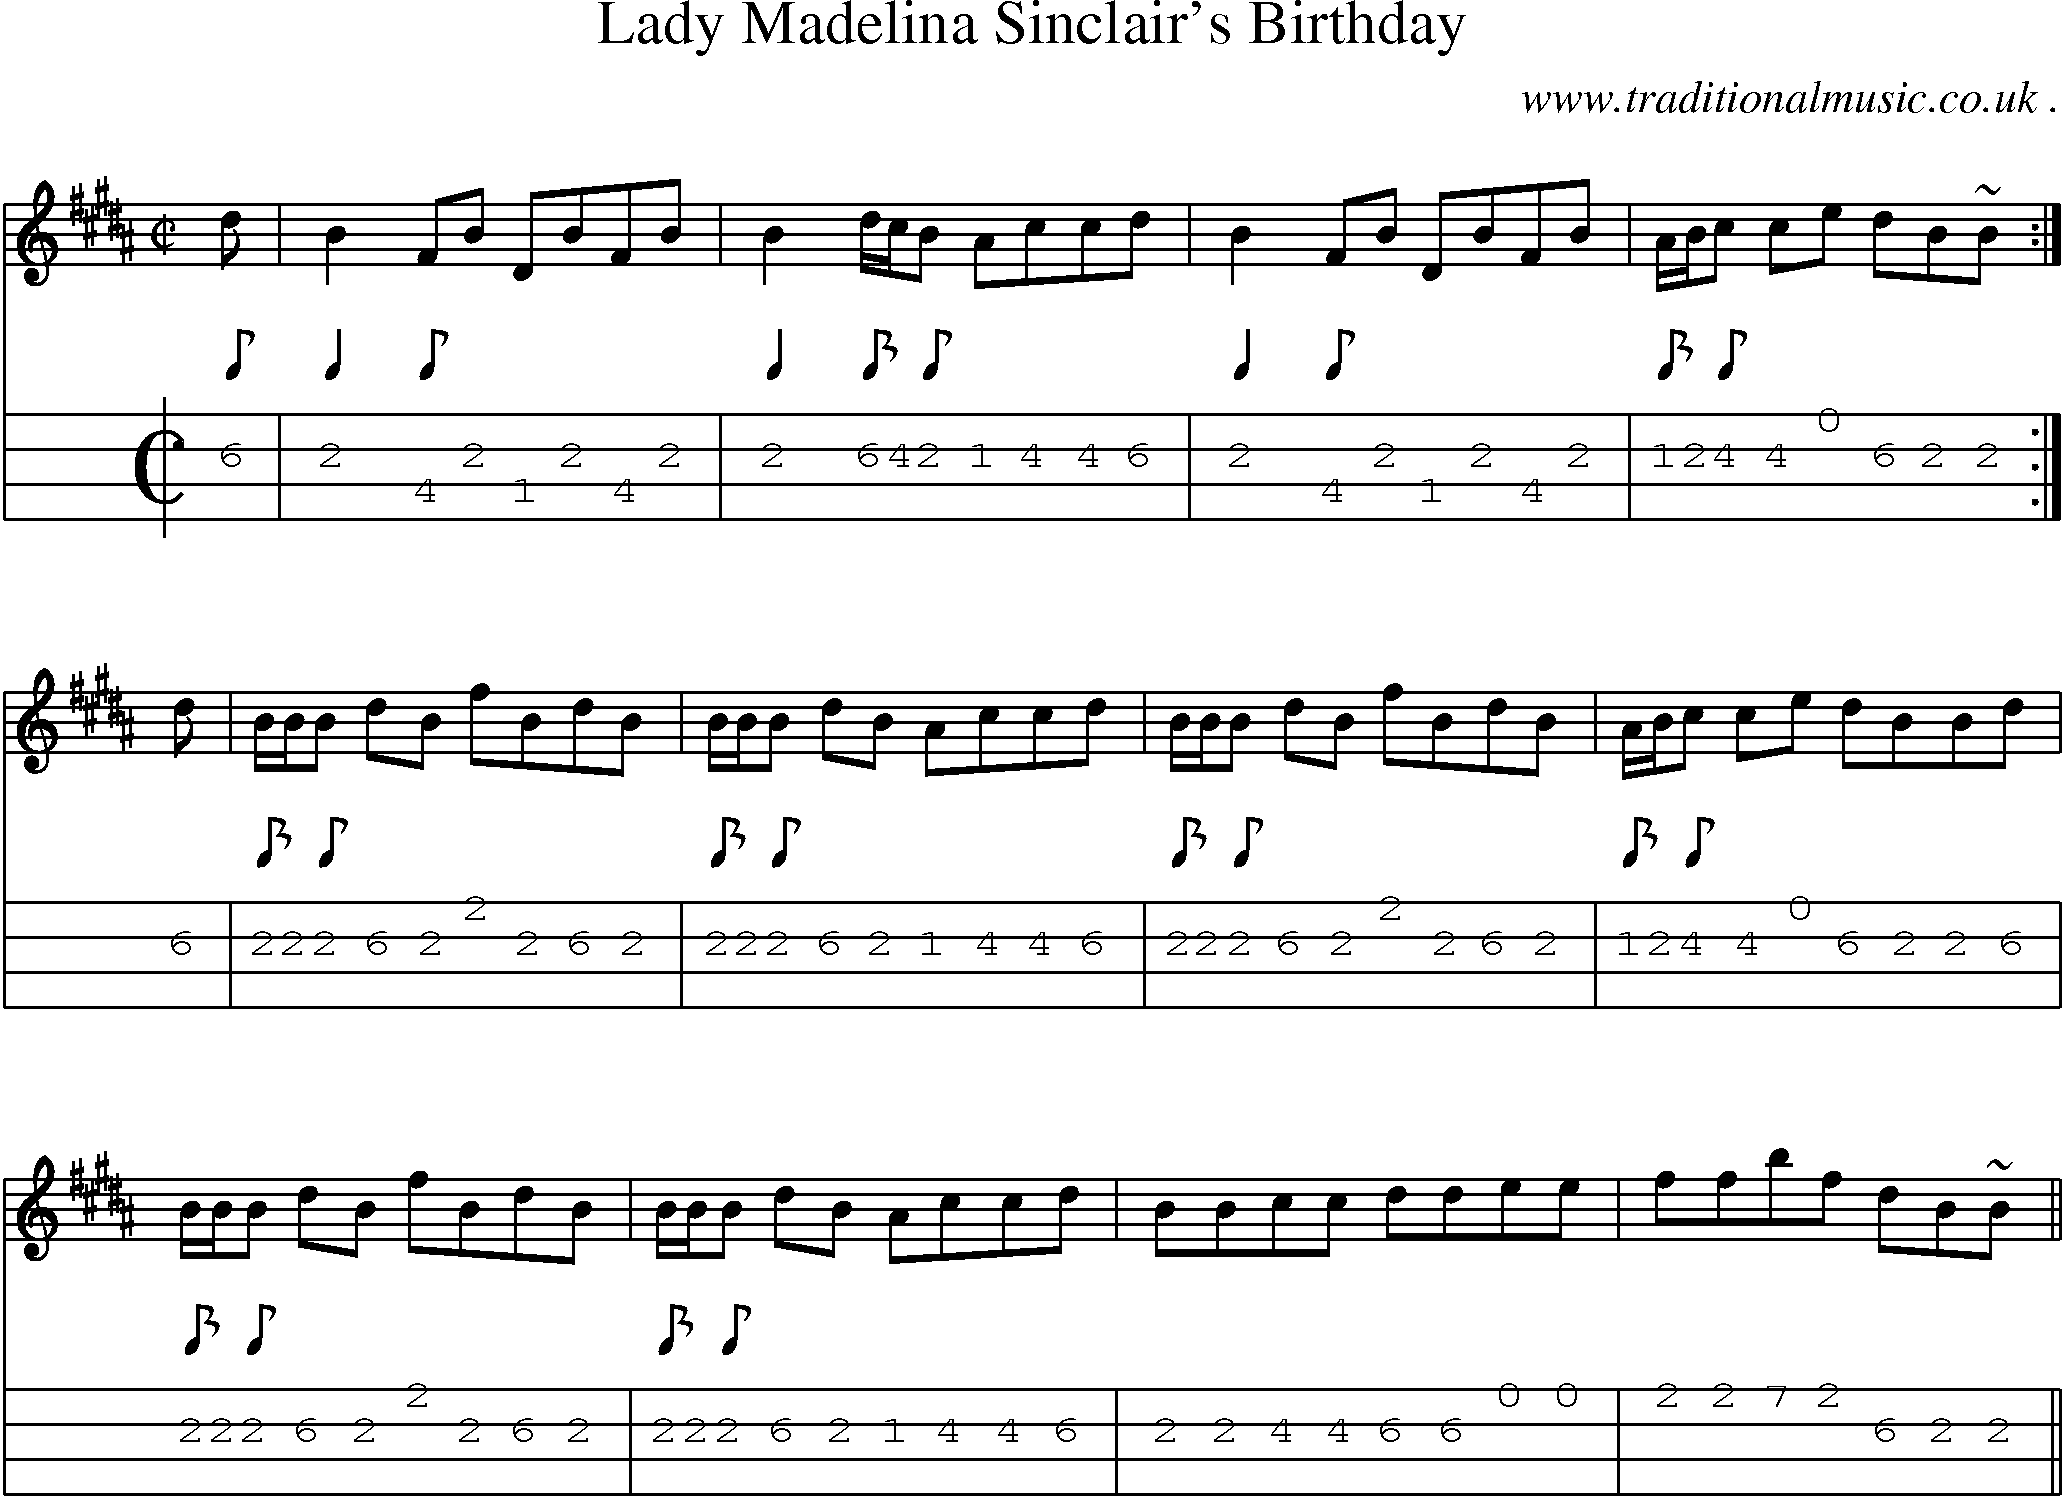 Sheet-music  score, Chords and Mandolin Tabs for Lady Madelina Sinclairs Birthday